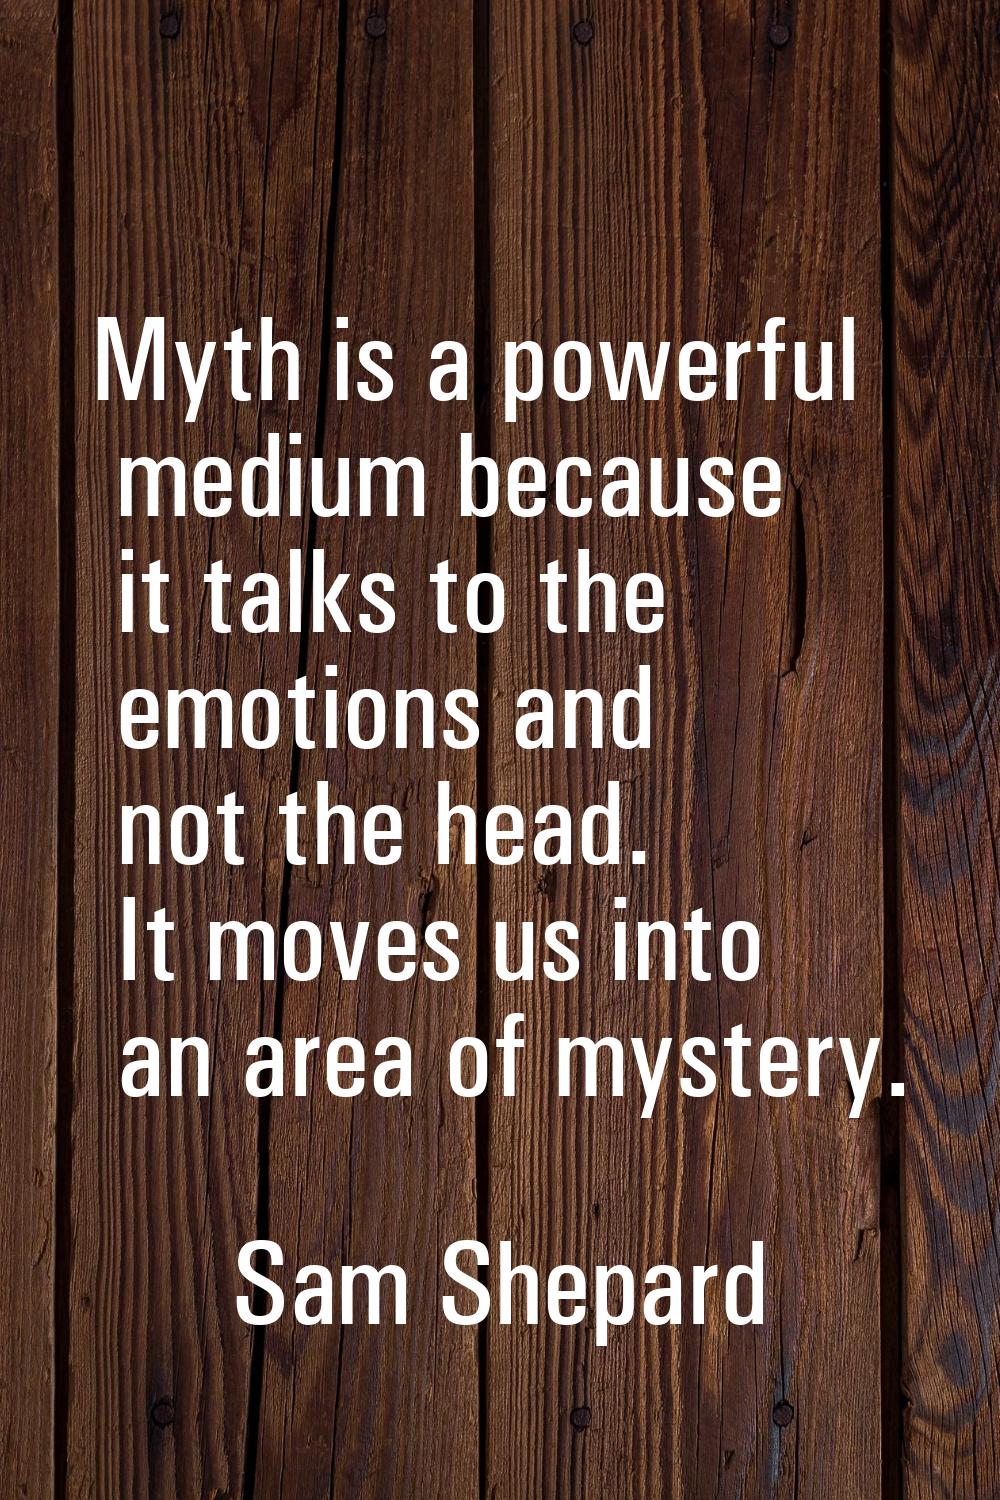 Myth is a powerful medium because it talks to the emotions and not the head. It moves us into an ar